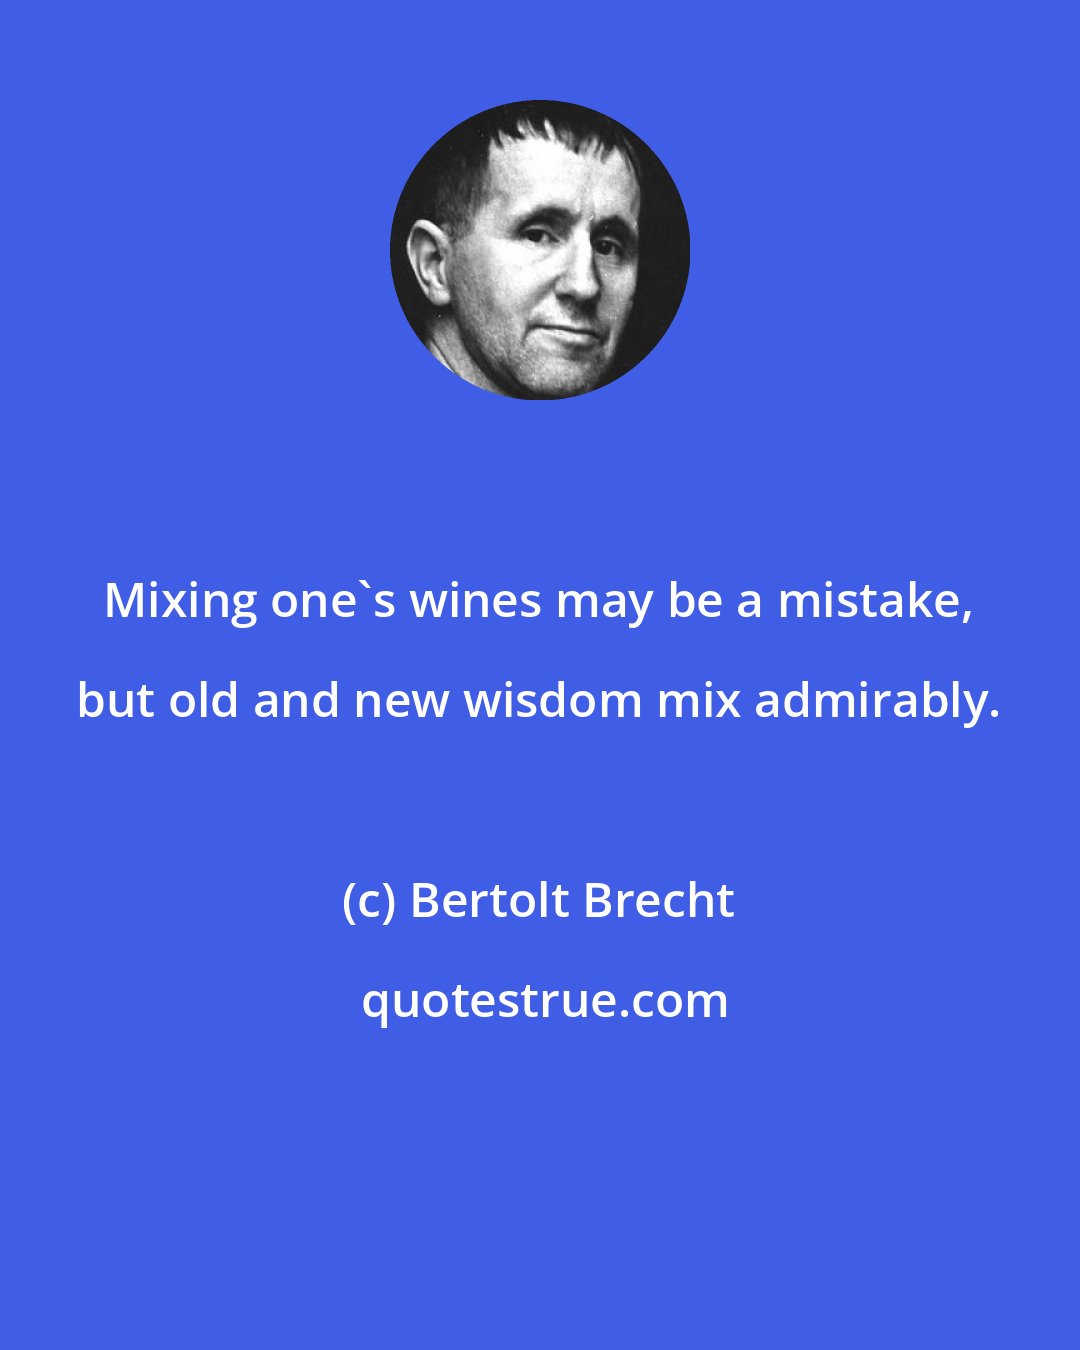 Bertolt Brecht: Mixing one's wines may be a mistake, but old and new wisdom mix admirably.